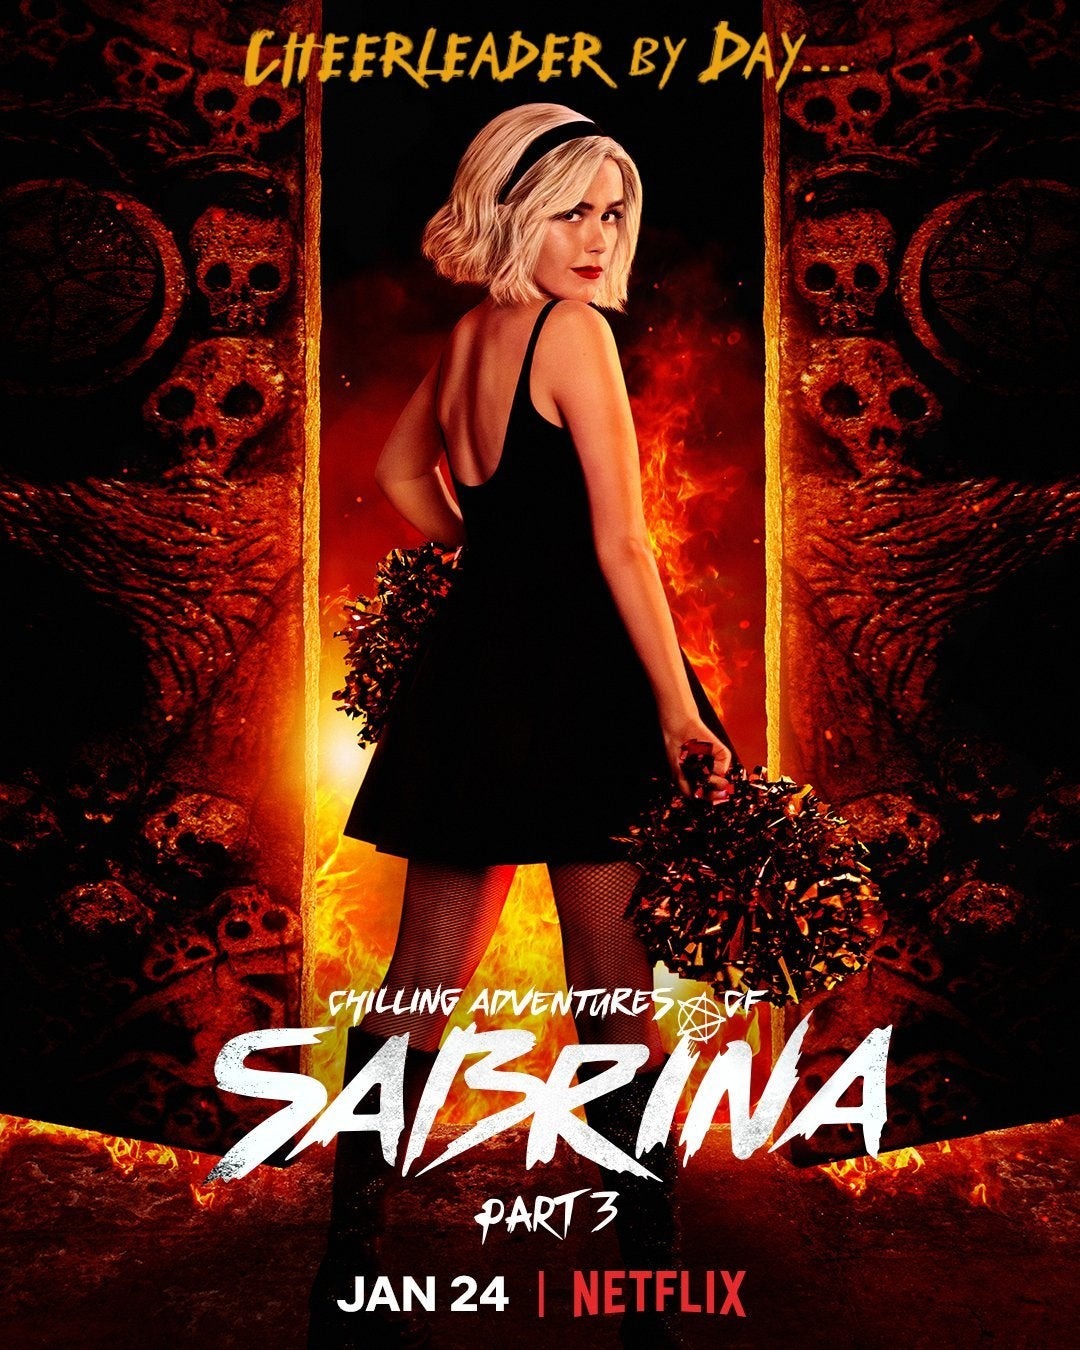 "CHILLING ADVENTURES OF SABRINA"